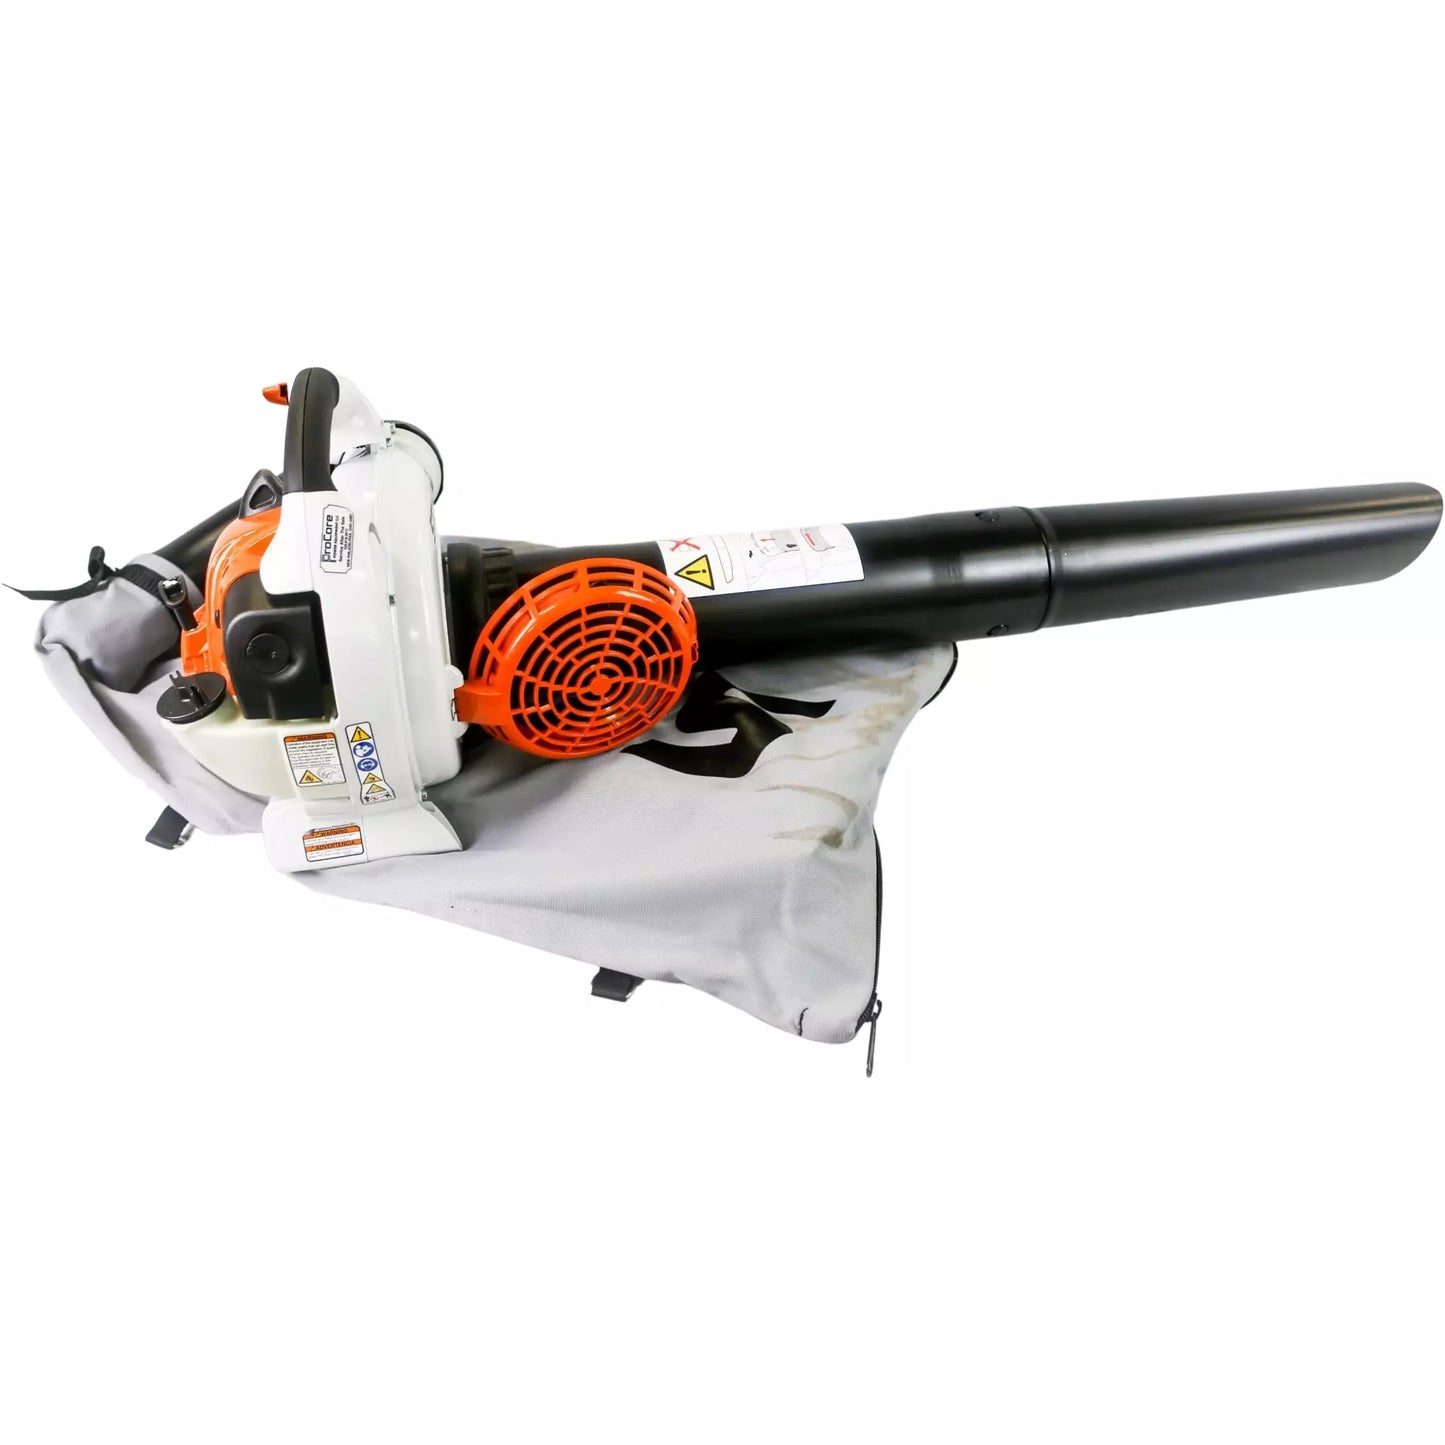 The ECHO Shred 'N' Vac can function as a blower to clear leaves